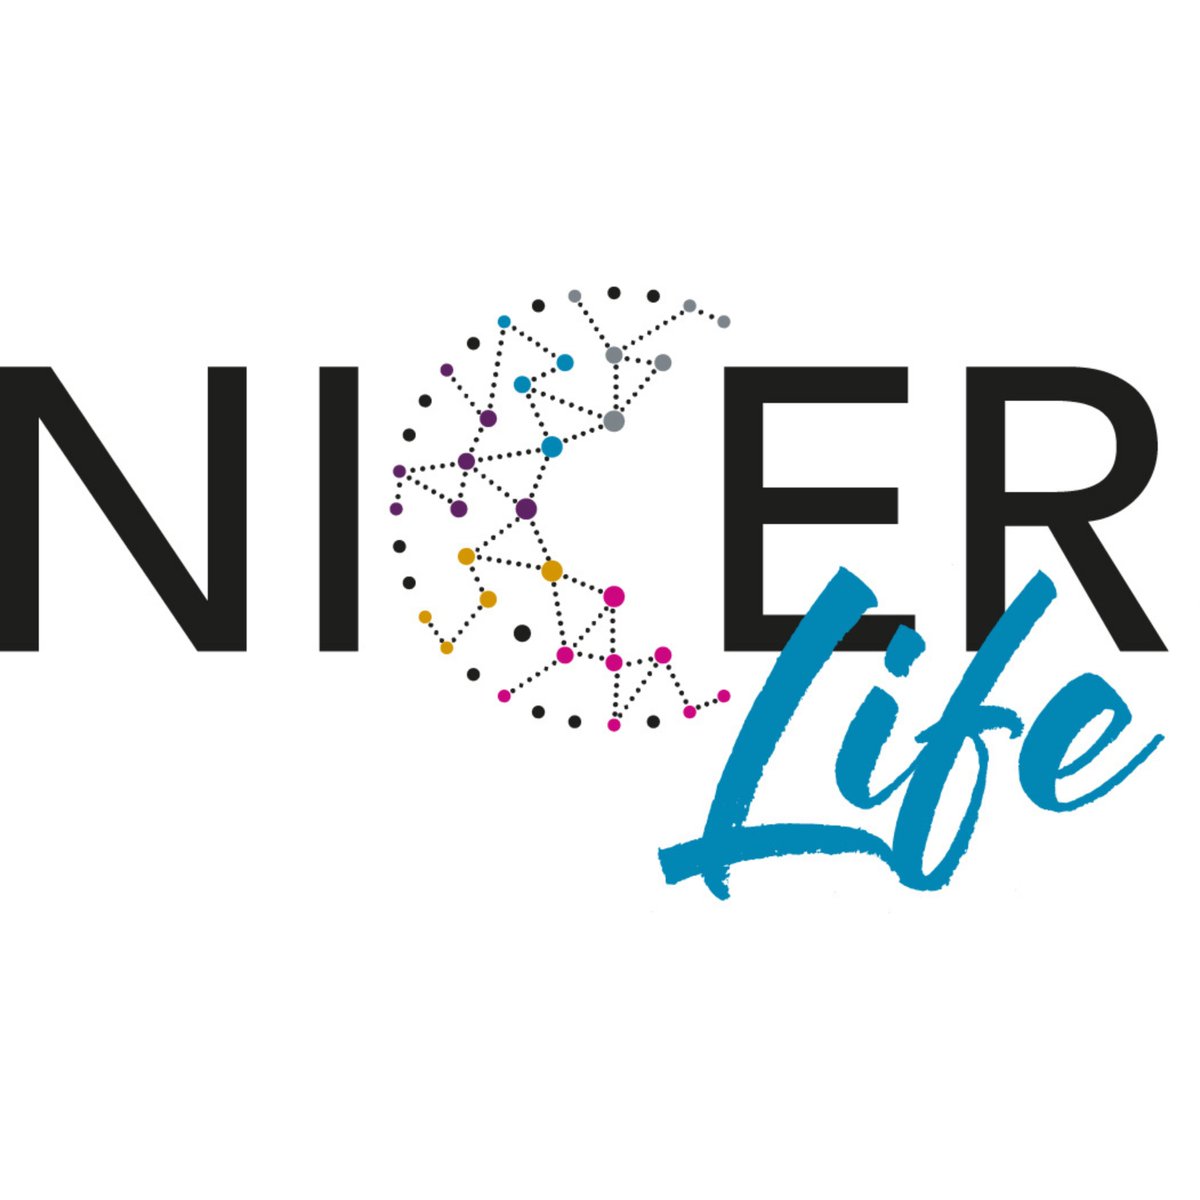 The first episode of the NICER Life podcast is now available! In this first episode, the team talks to Jyoti Ahuja on regulation, critical minerals and the circular economy. Give it a listen now 👇 🎧 Spotify: lnkd.in/eqdj59Kq 🎧 Apple: lnkd.in/evfVKGzx